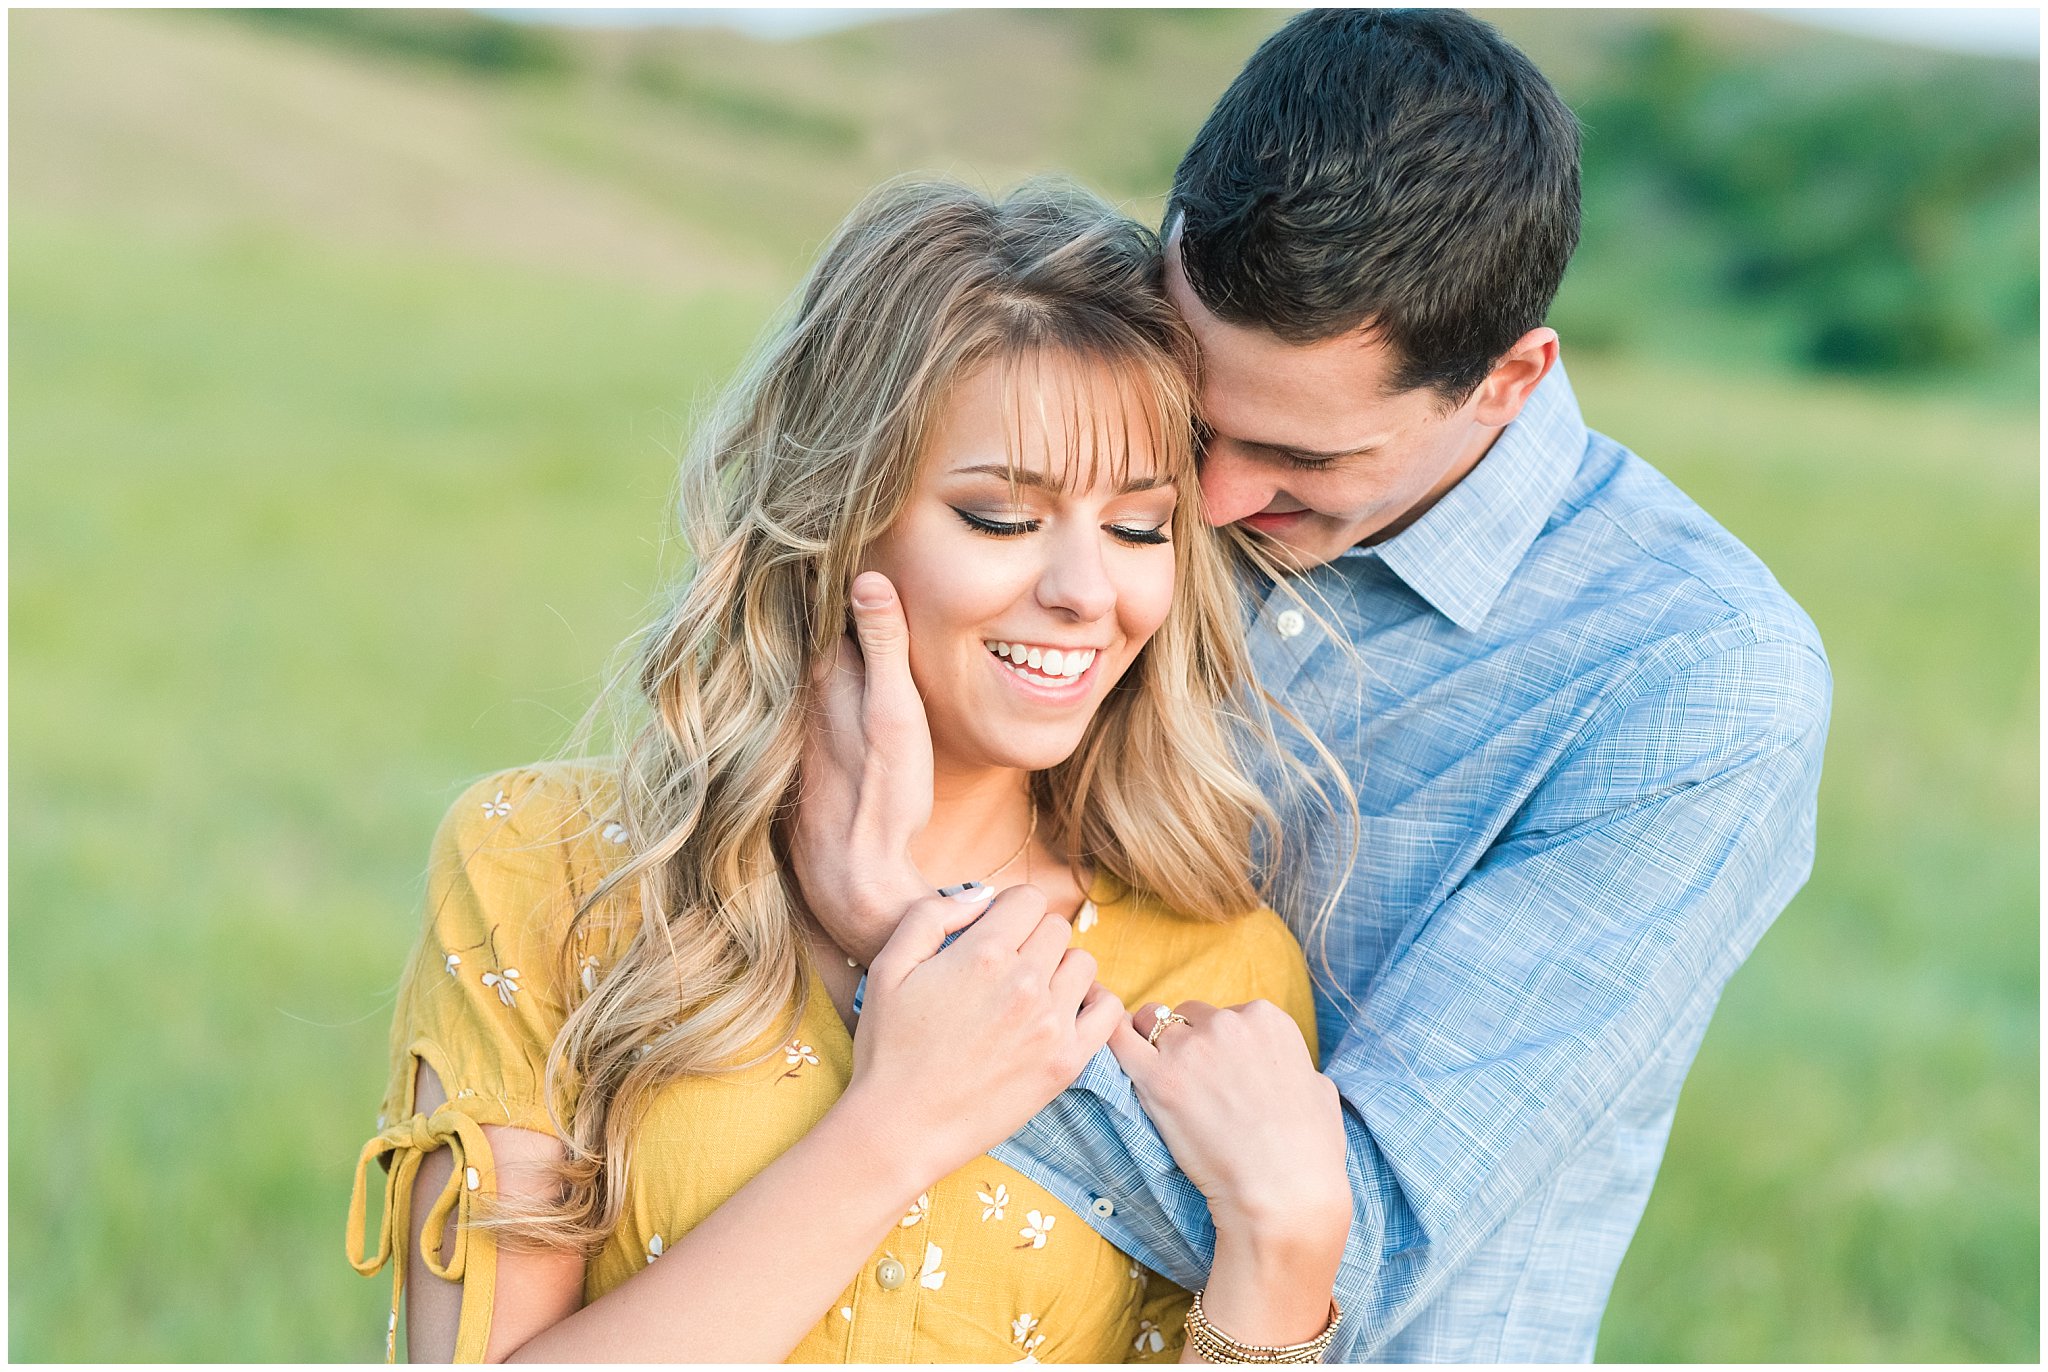 Couple in yellow dress and blue button up shirt on a grassy mountainside at Tunnel Springs | Utah State Capitol and Tunnel Springs Engagement Session | Jessie and Dallin Photography